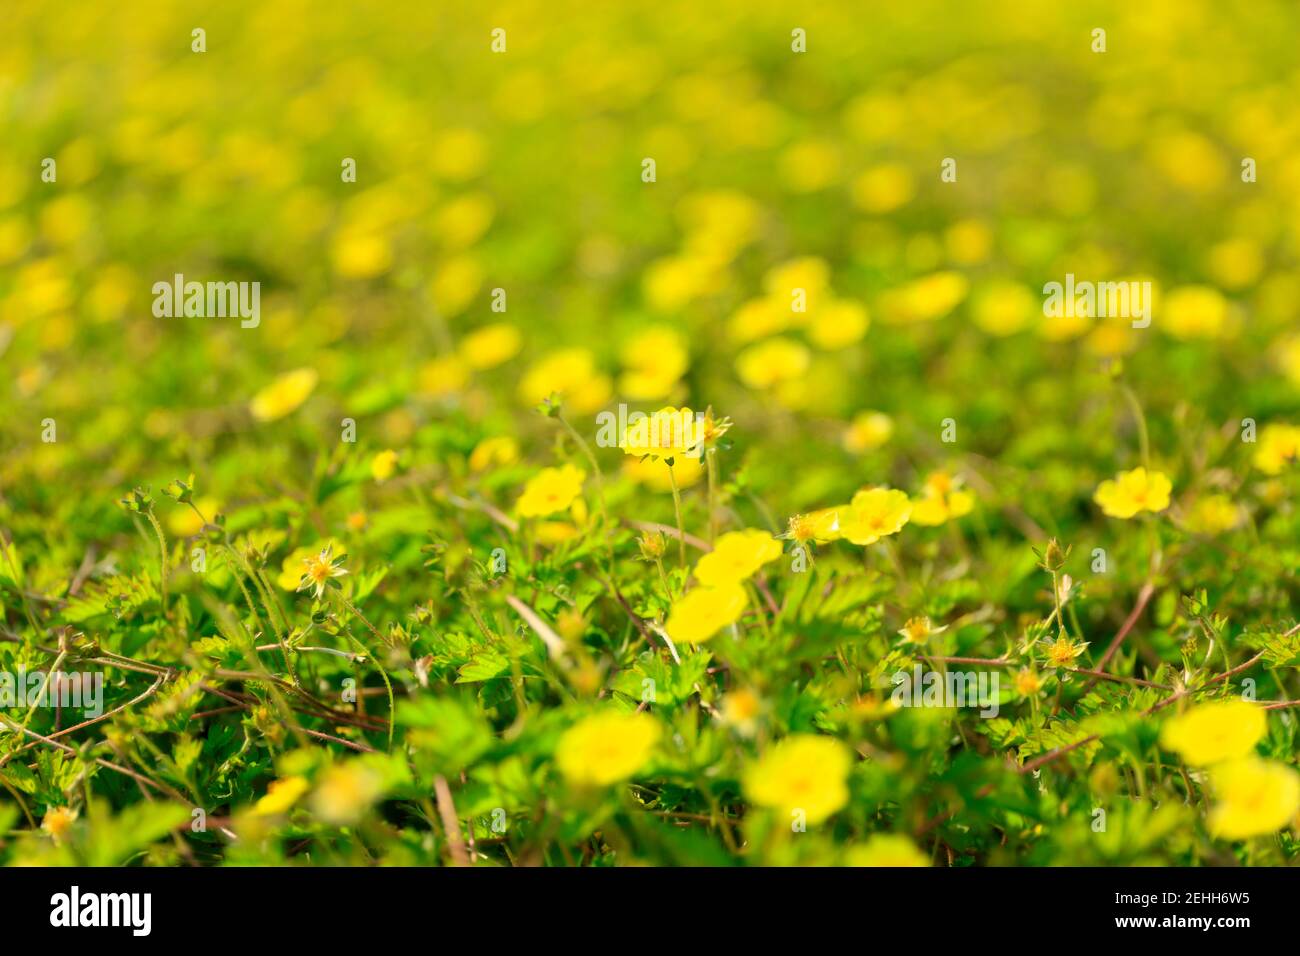 Grass background, green background, close-up Stock Photo